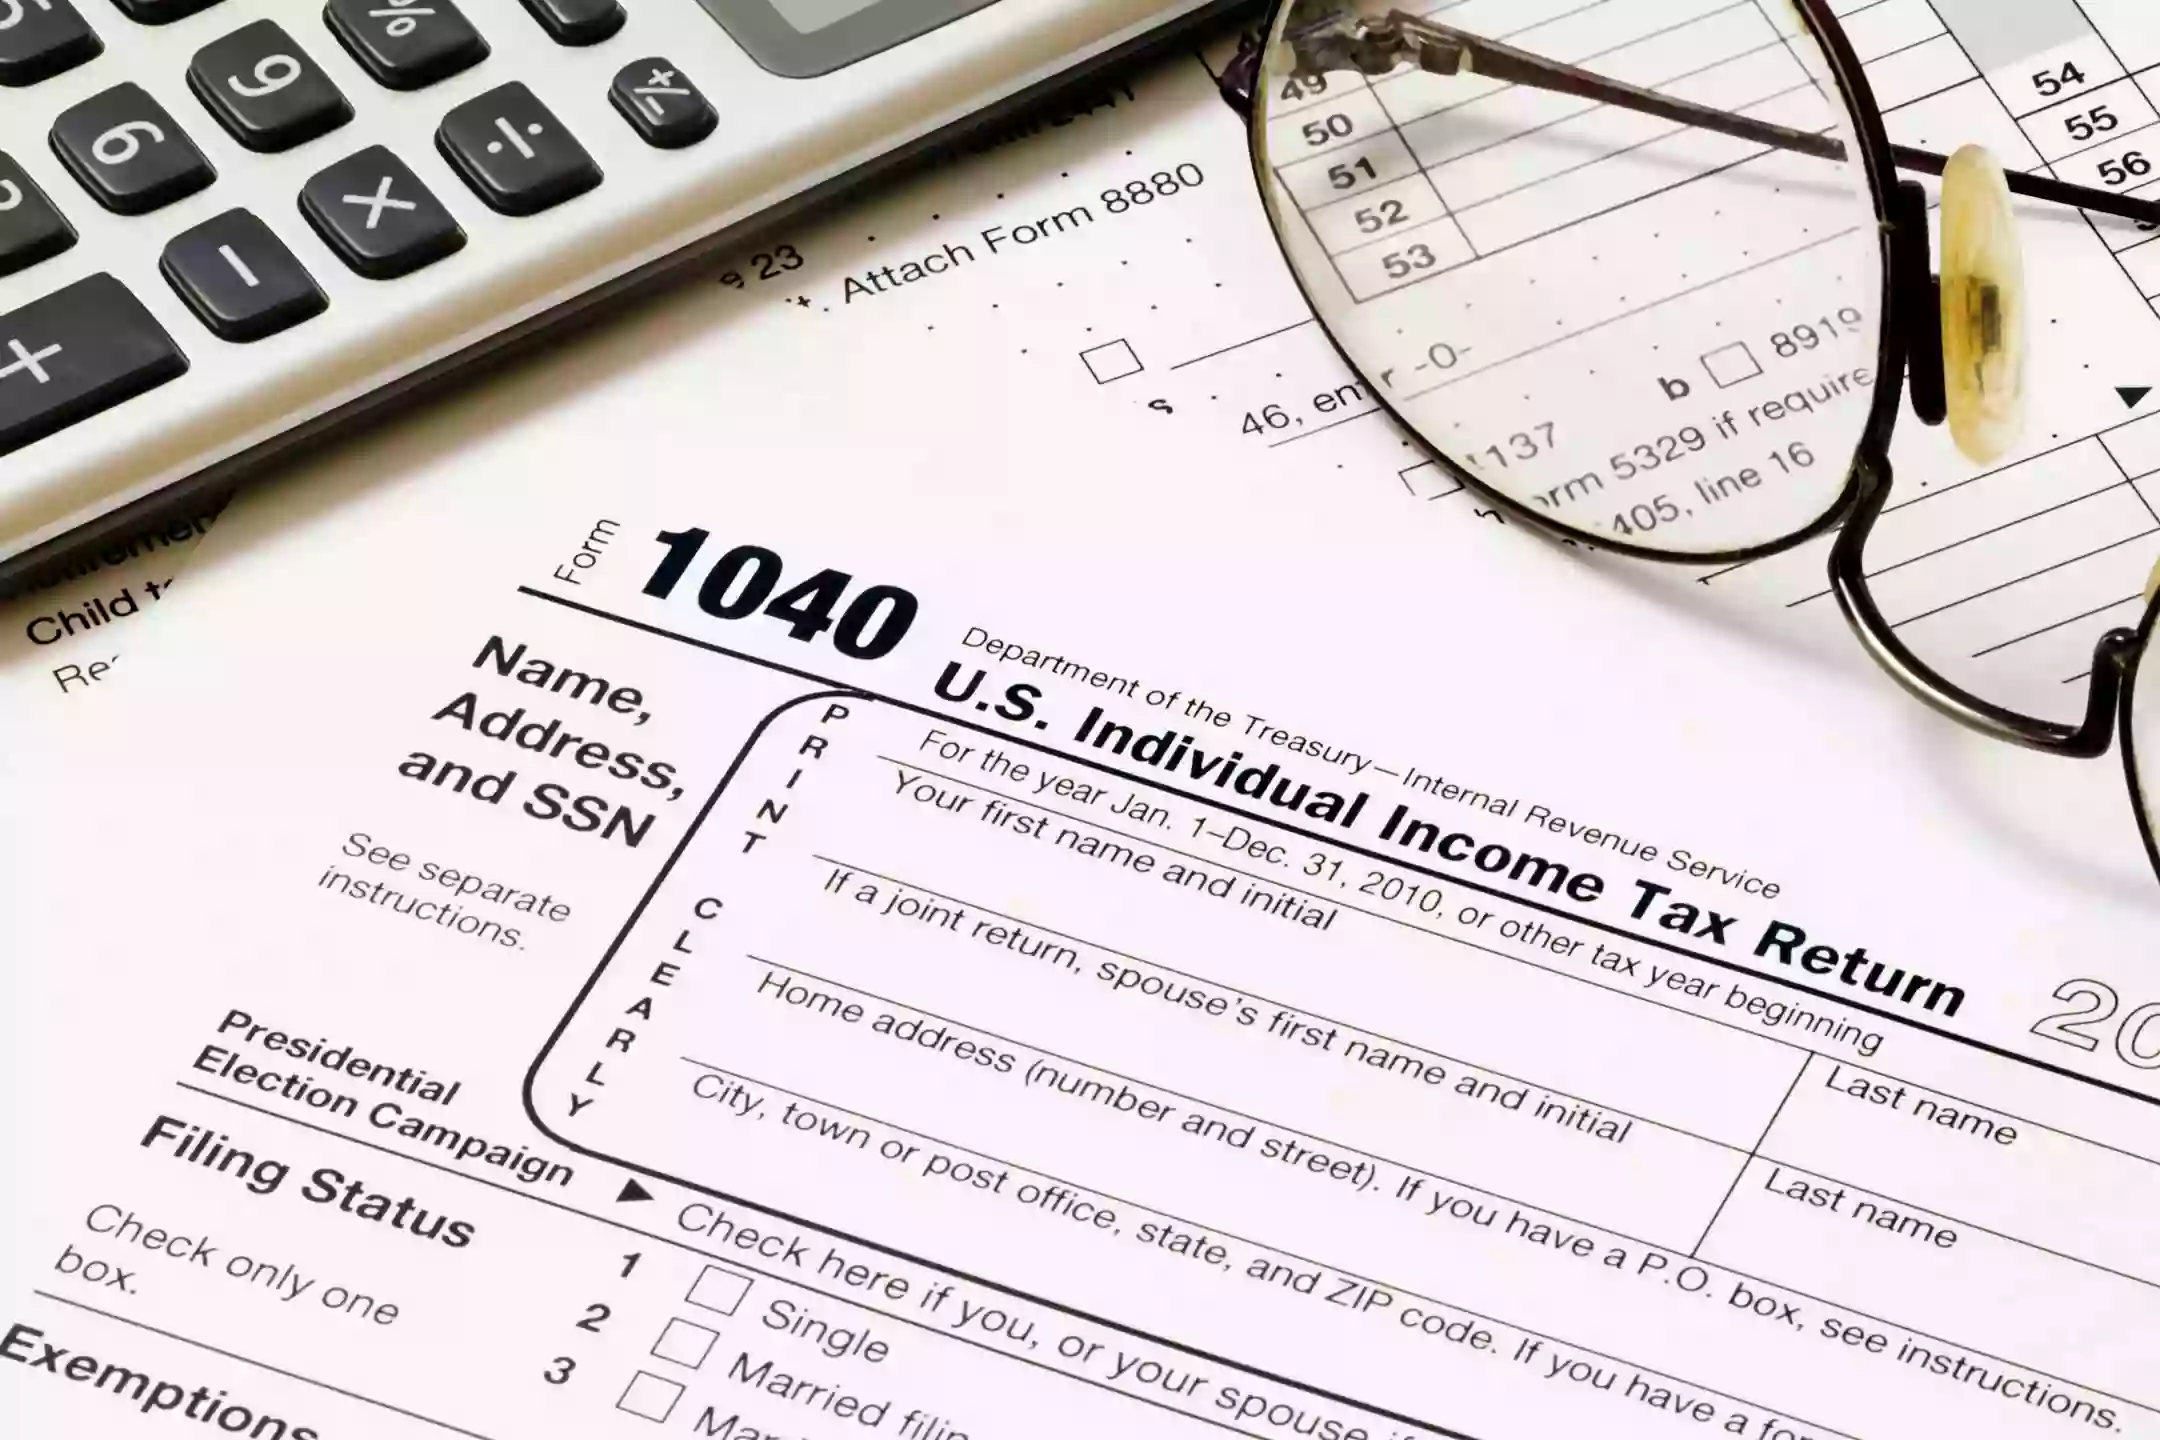 Carlsbad Tax Services